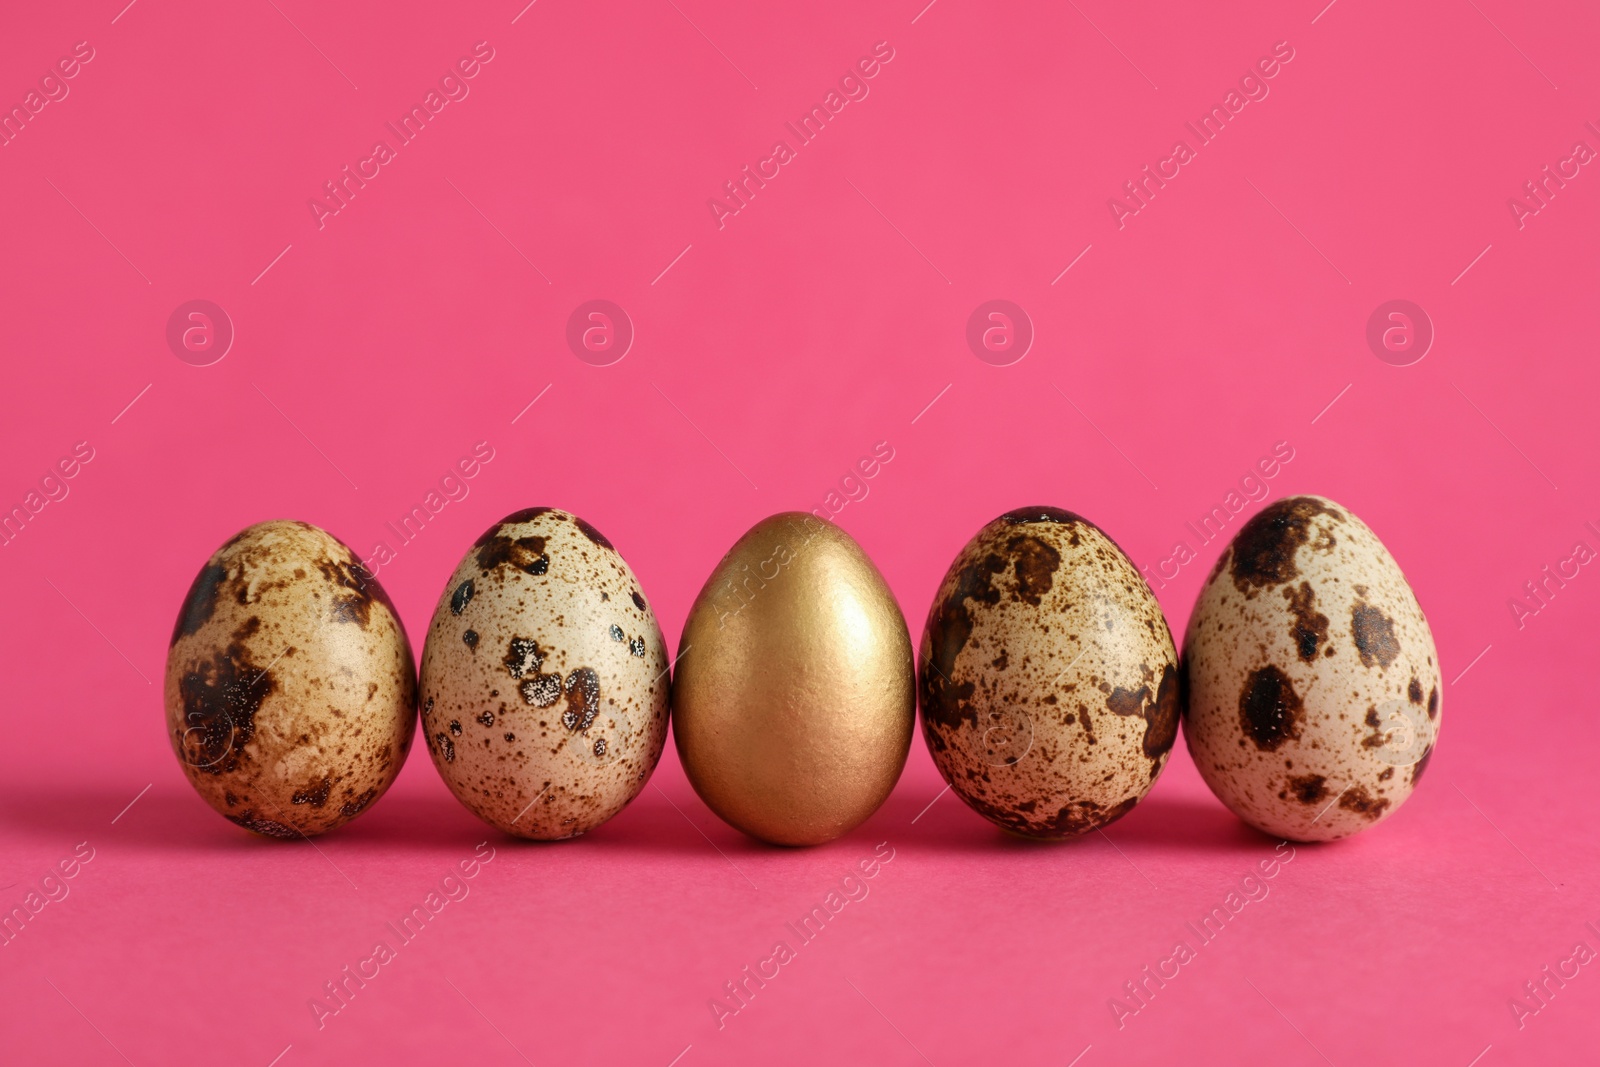 Photo of Golden and ordinary quail eggs on pink background